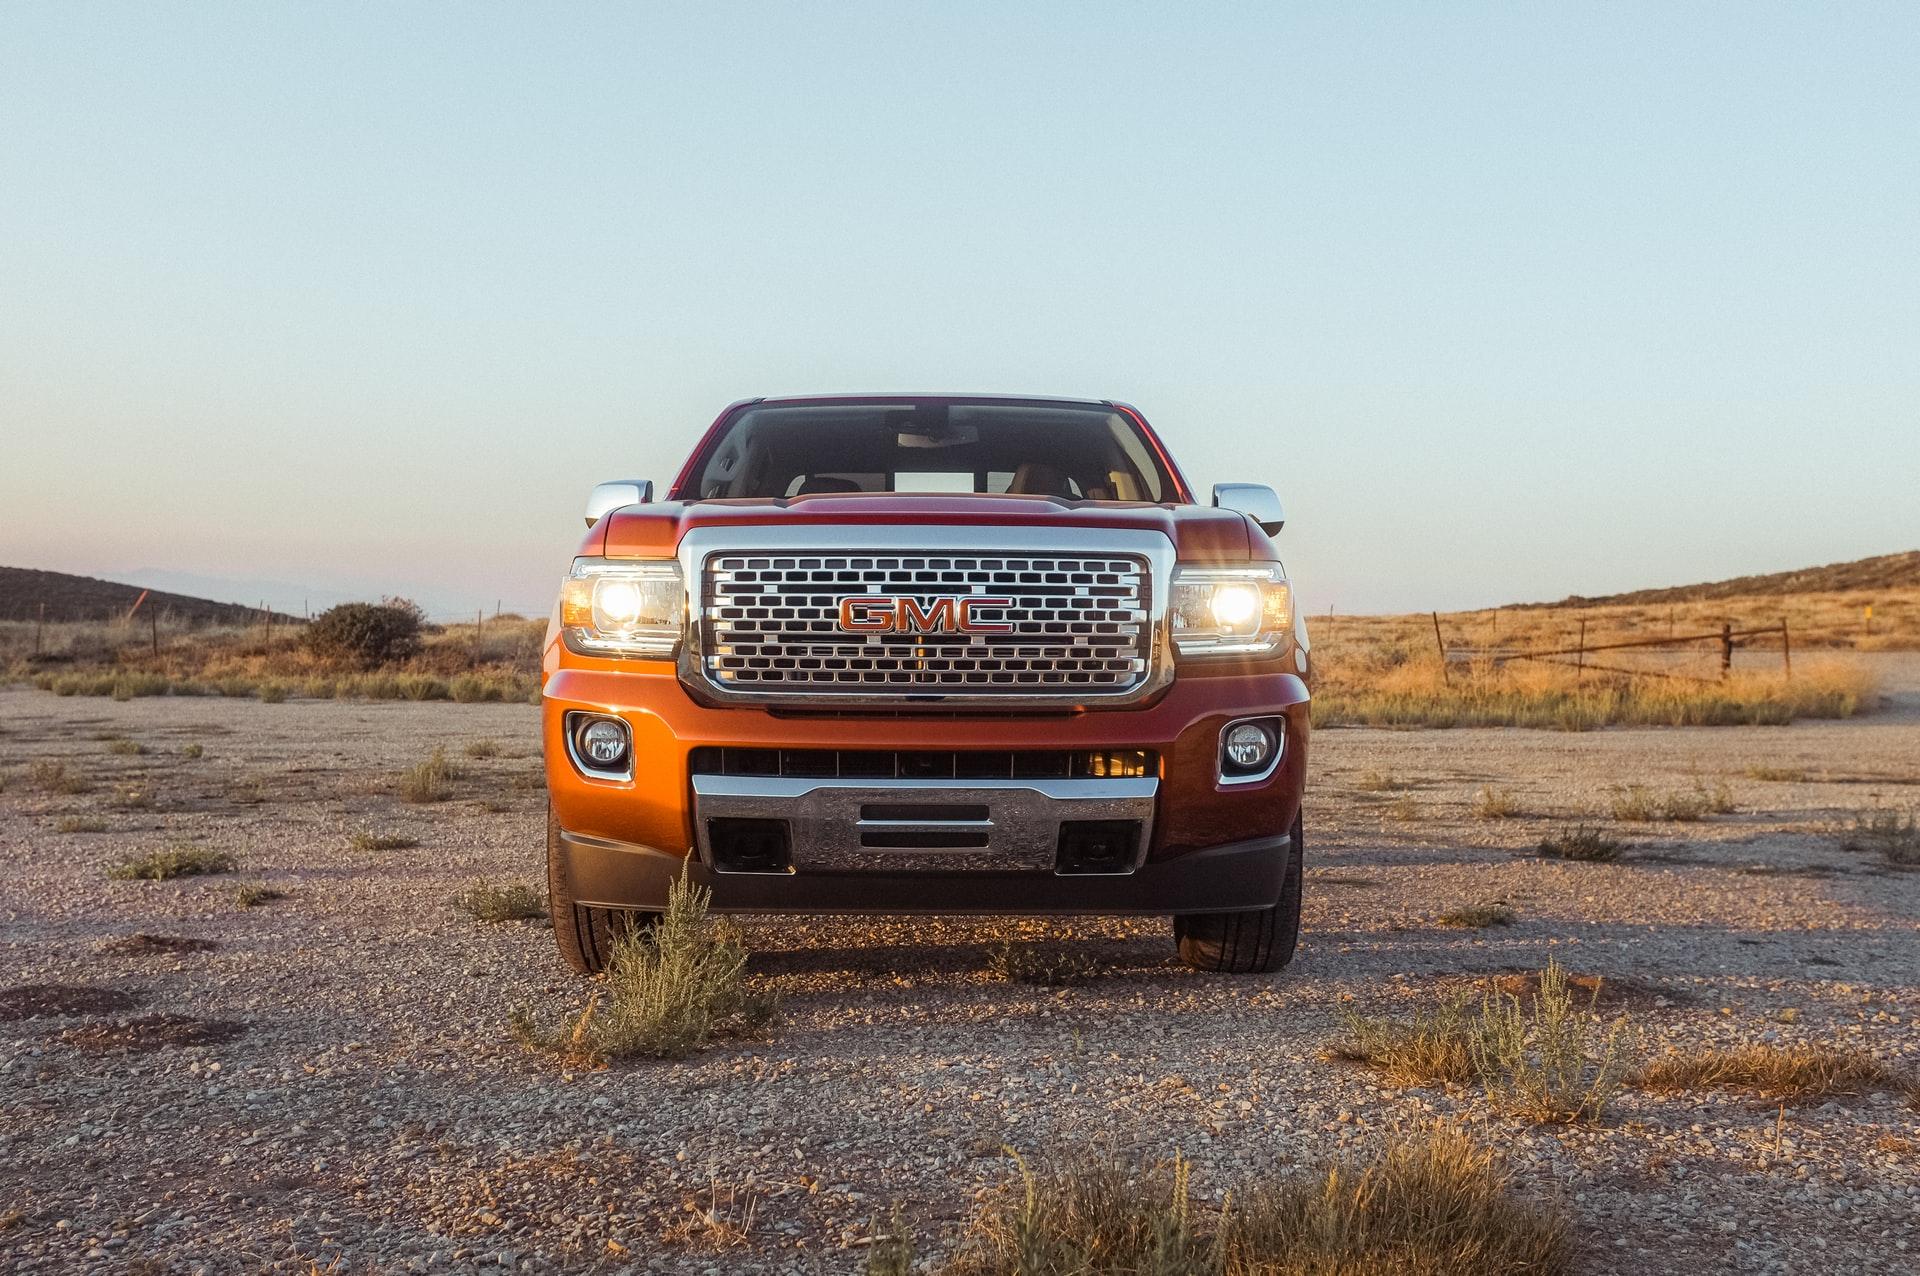 GMC pickups have very similar trims, but what’s the difference between the Denali vs Sierra?